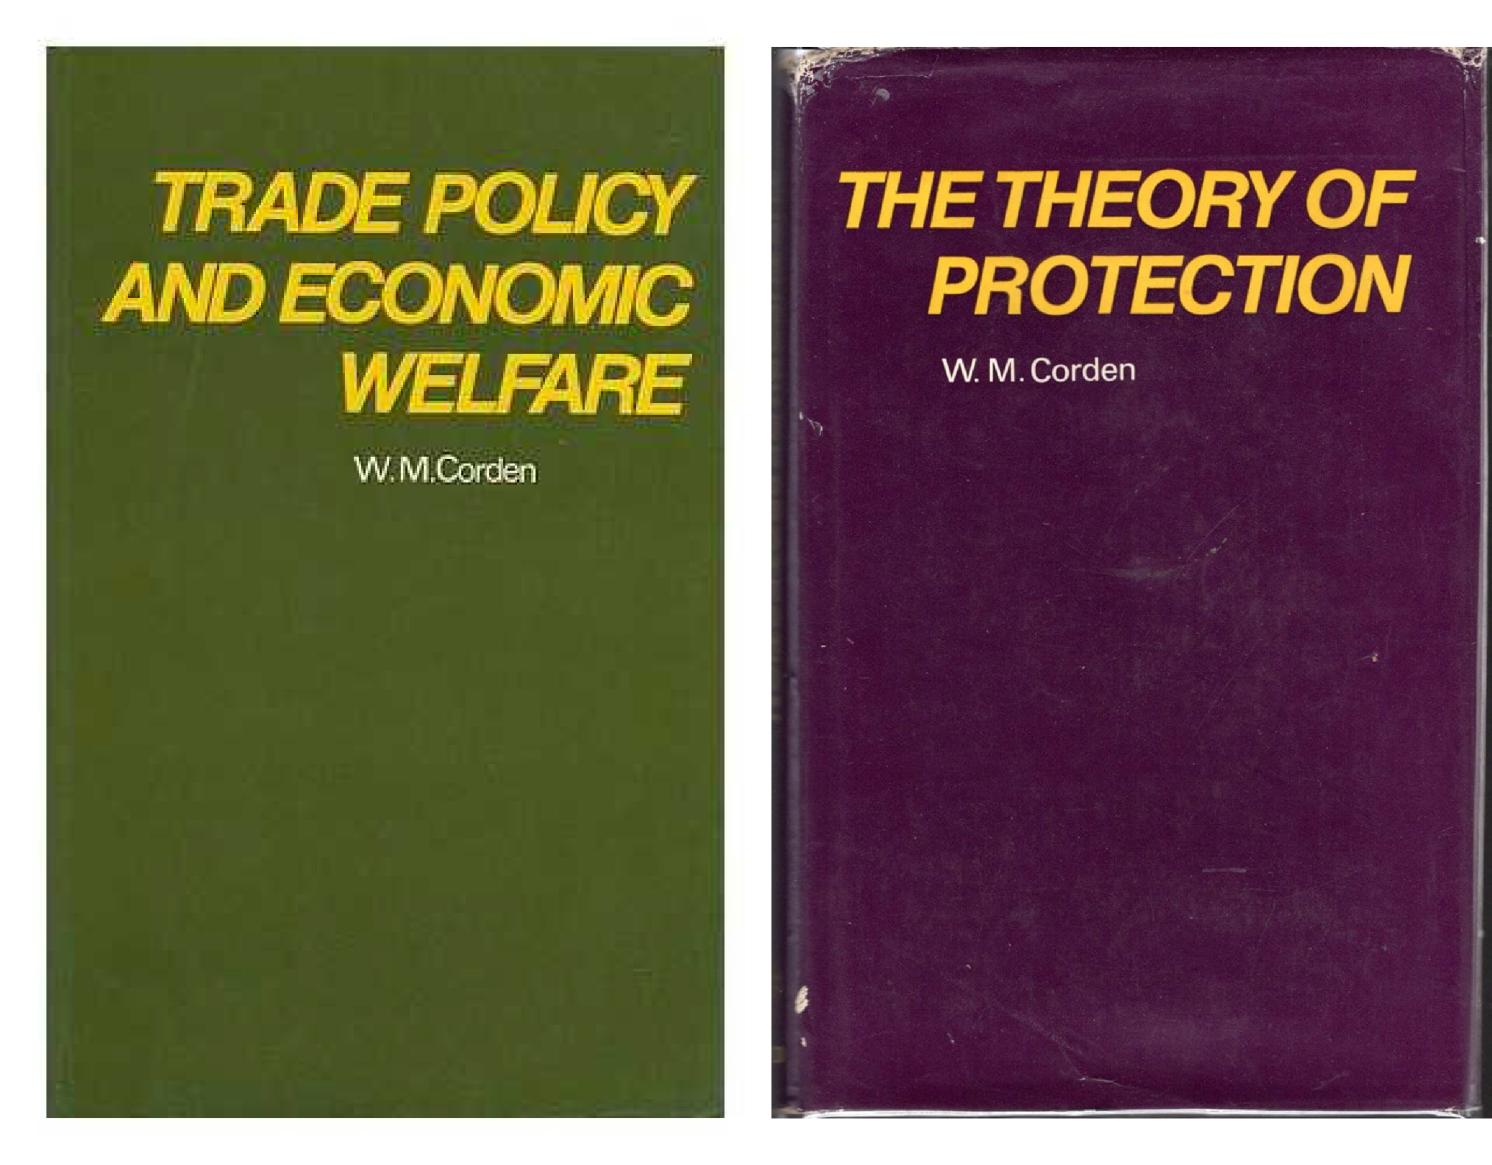 Two of Max Corden's book covers